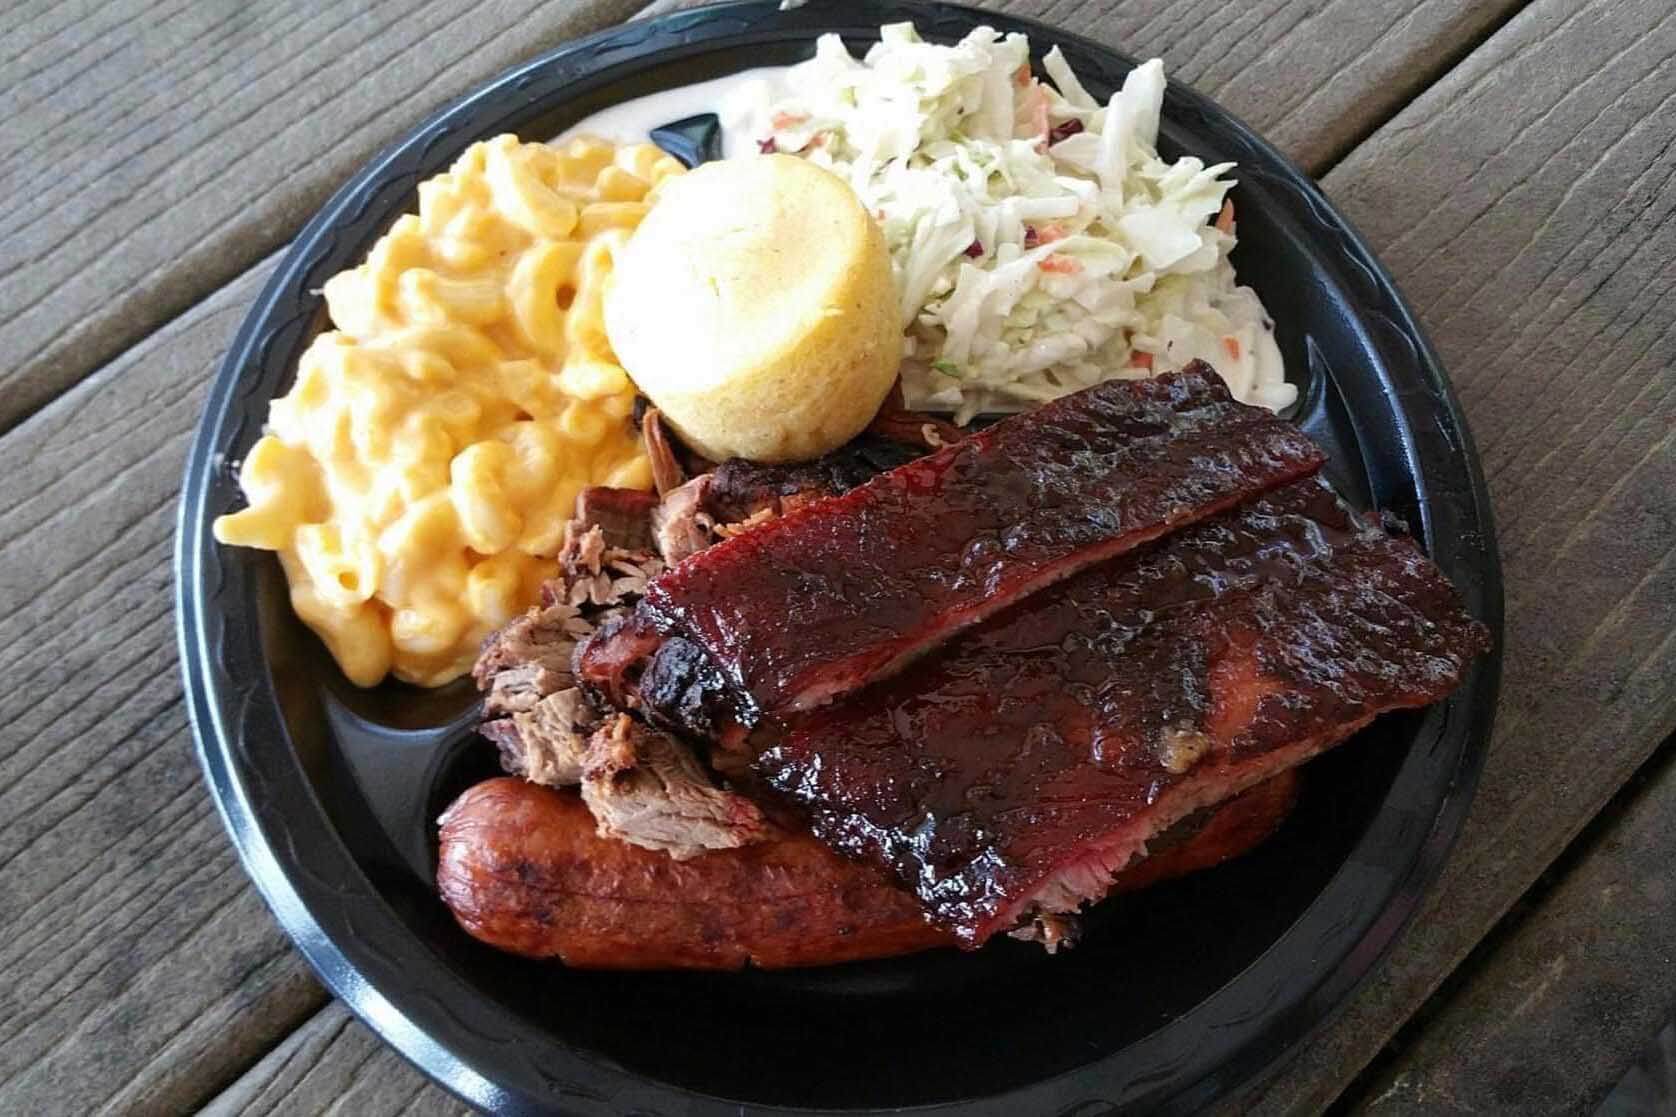 Captains BBQ plate of ribs and side dishes.